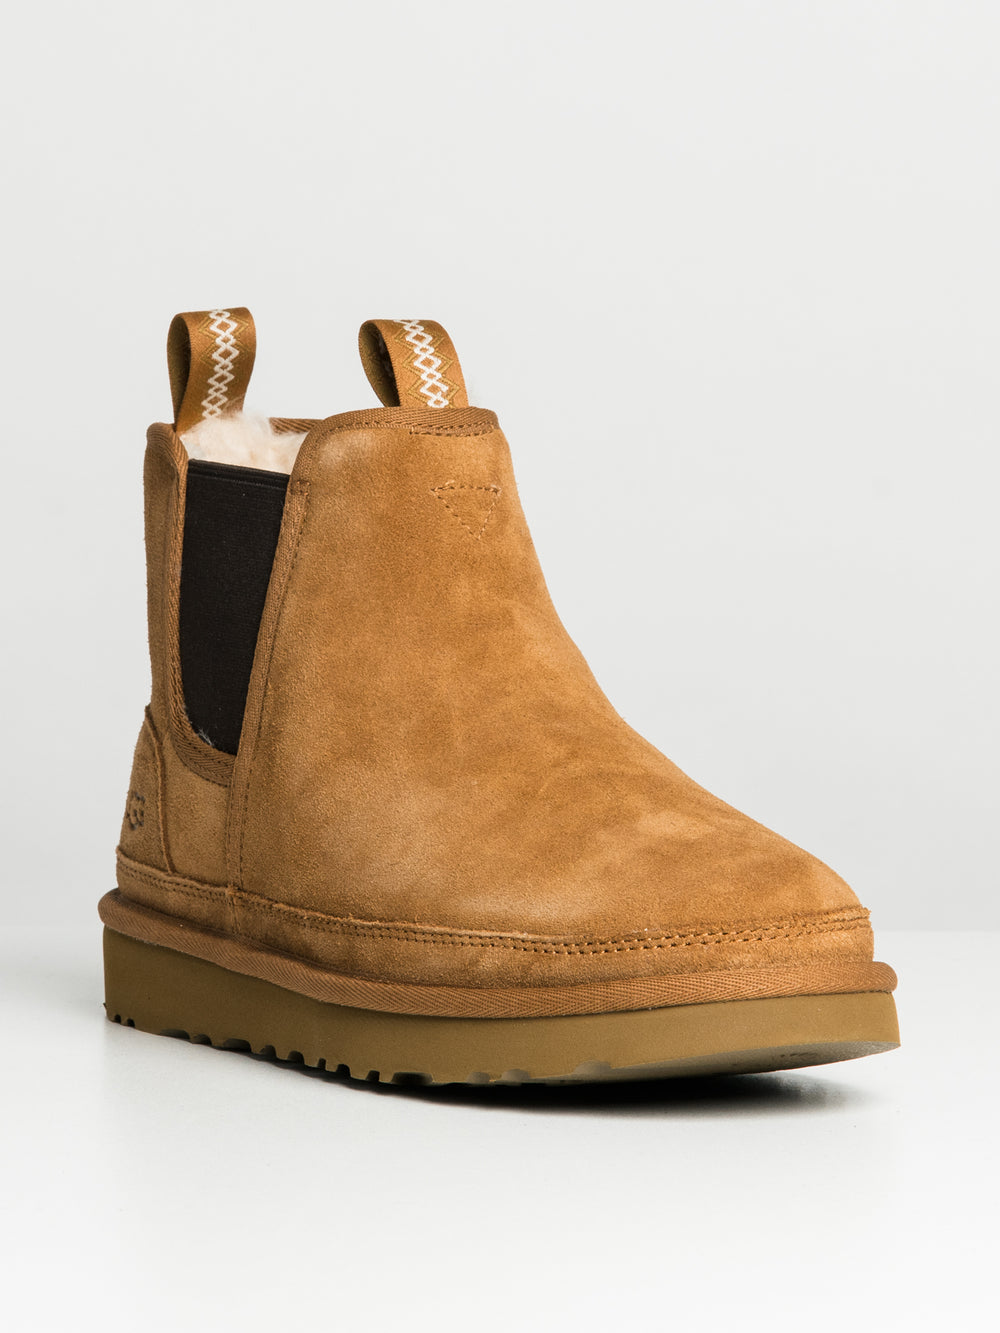 MENS UGG NEUMEL CHELSEA BOOT - CLEARANCE